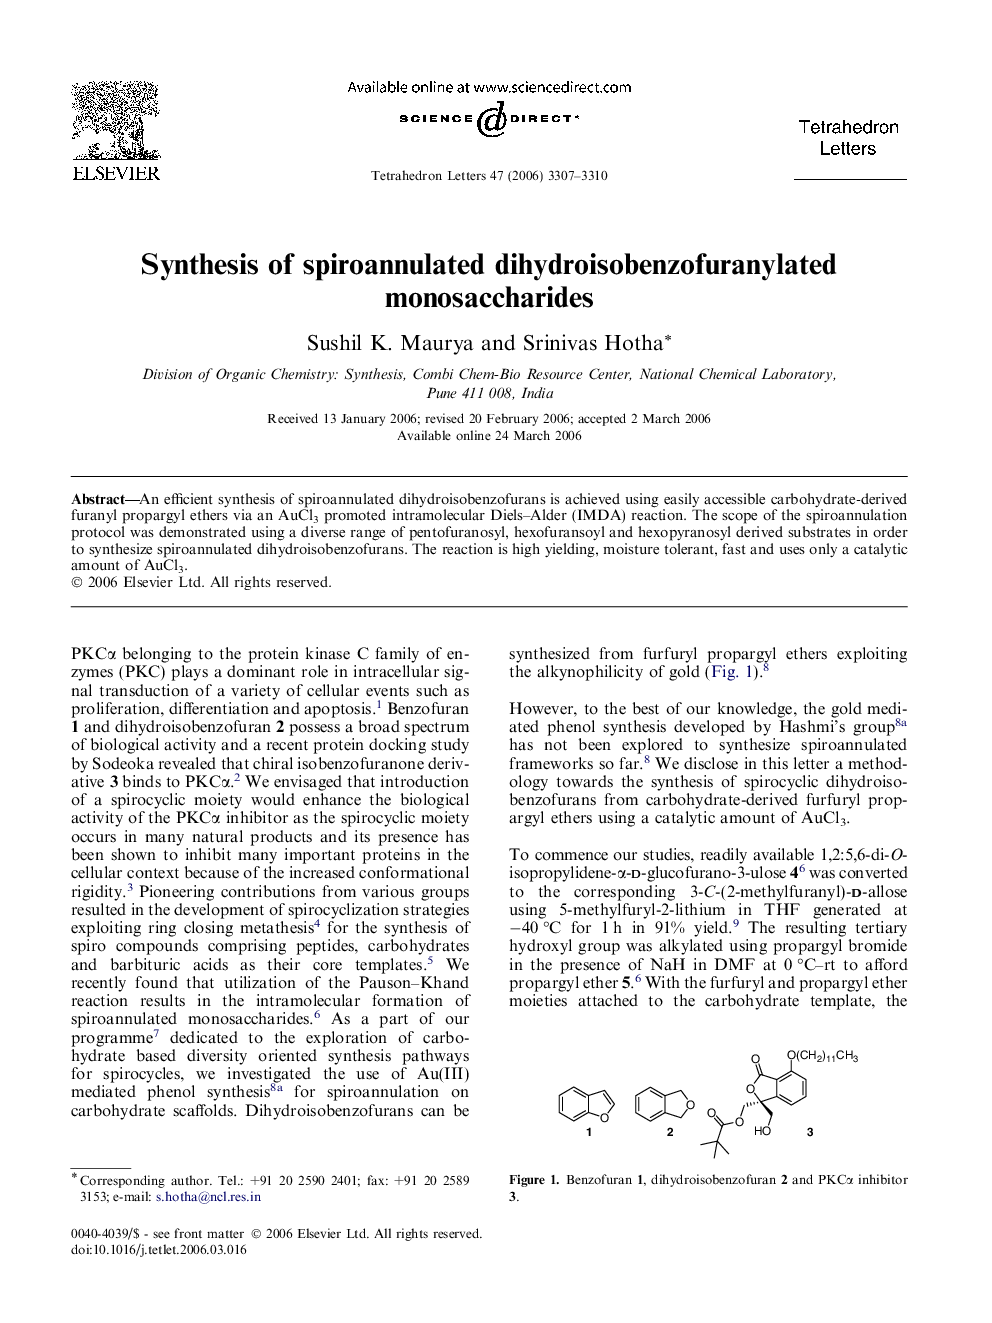 Synthesis of spiroannulated dihydroisobenzofuranylated monosaccharides